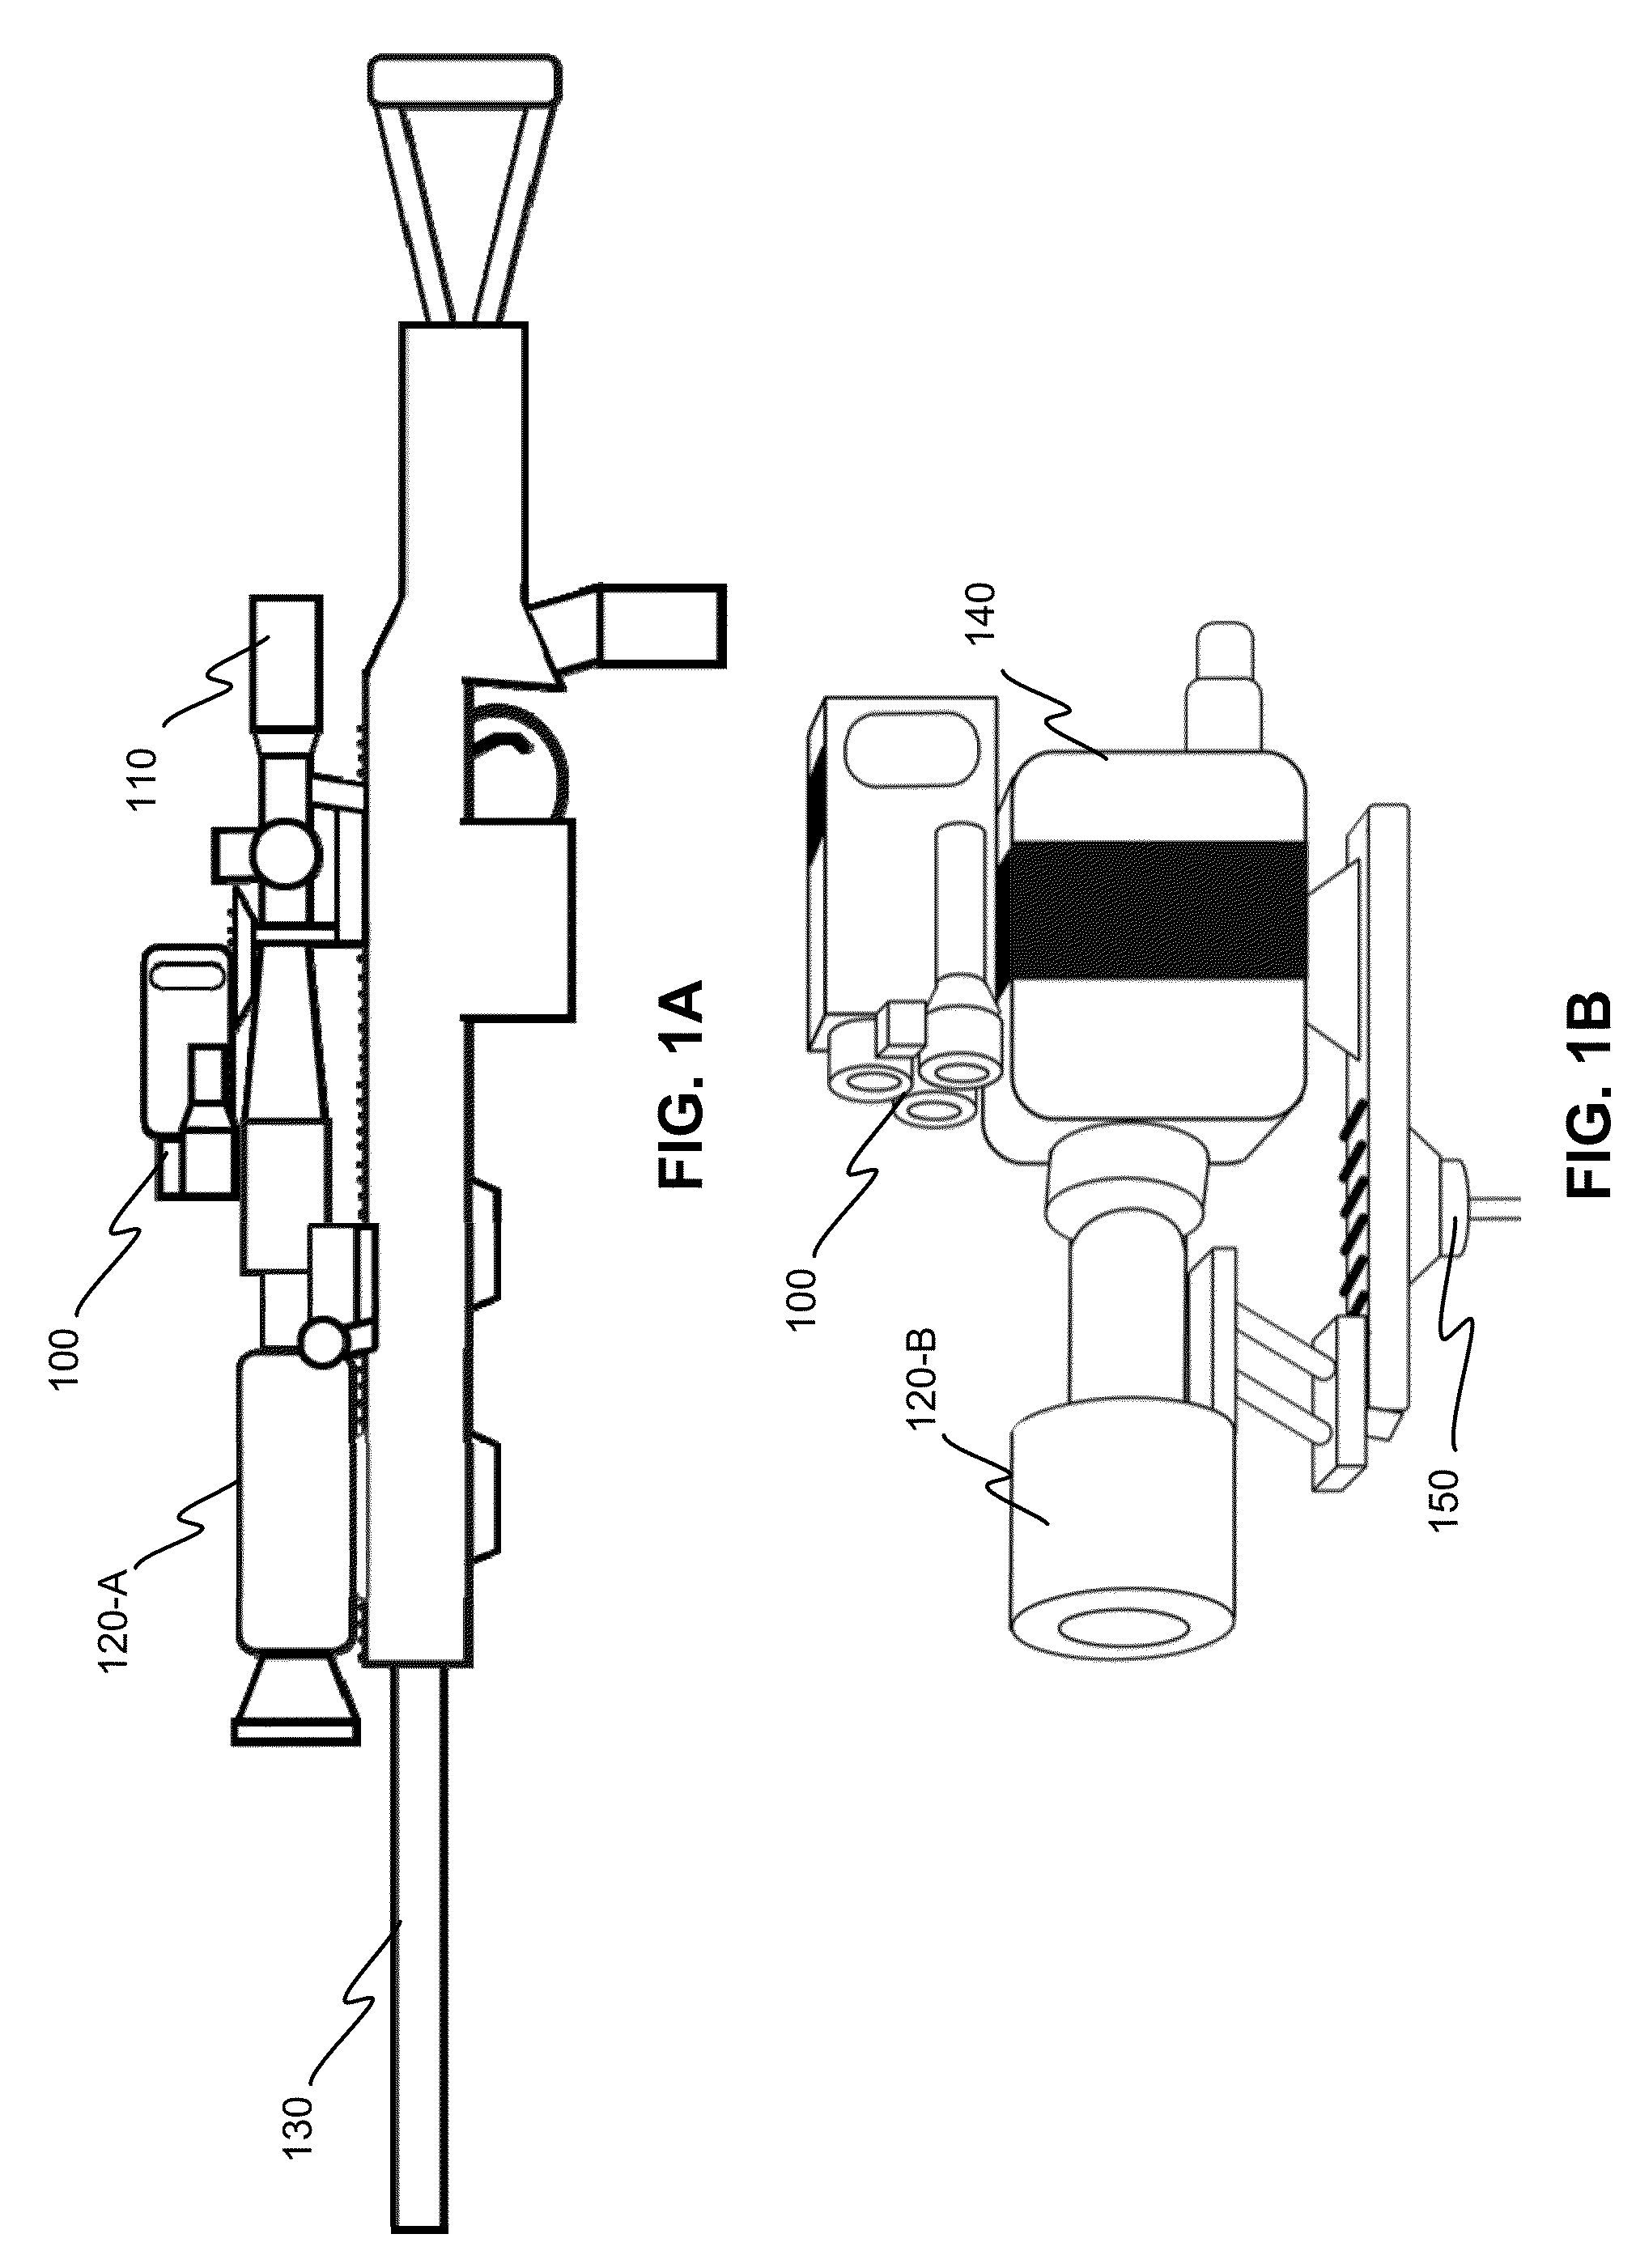 Riflescope with integrated wind sensor and targeting display